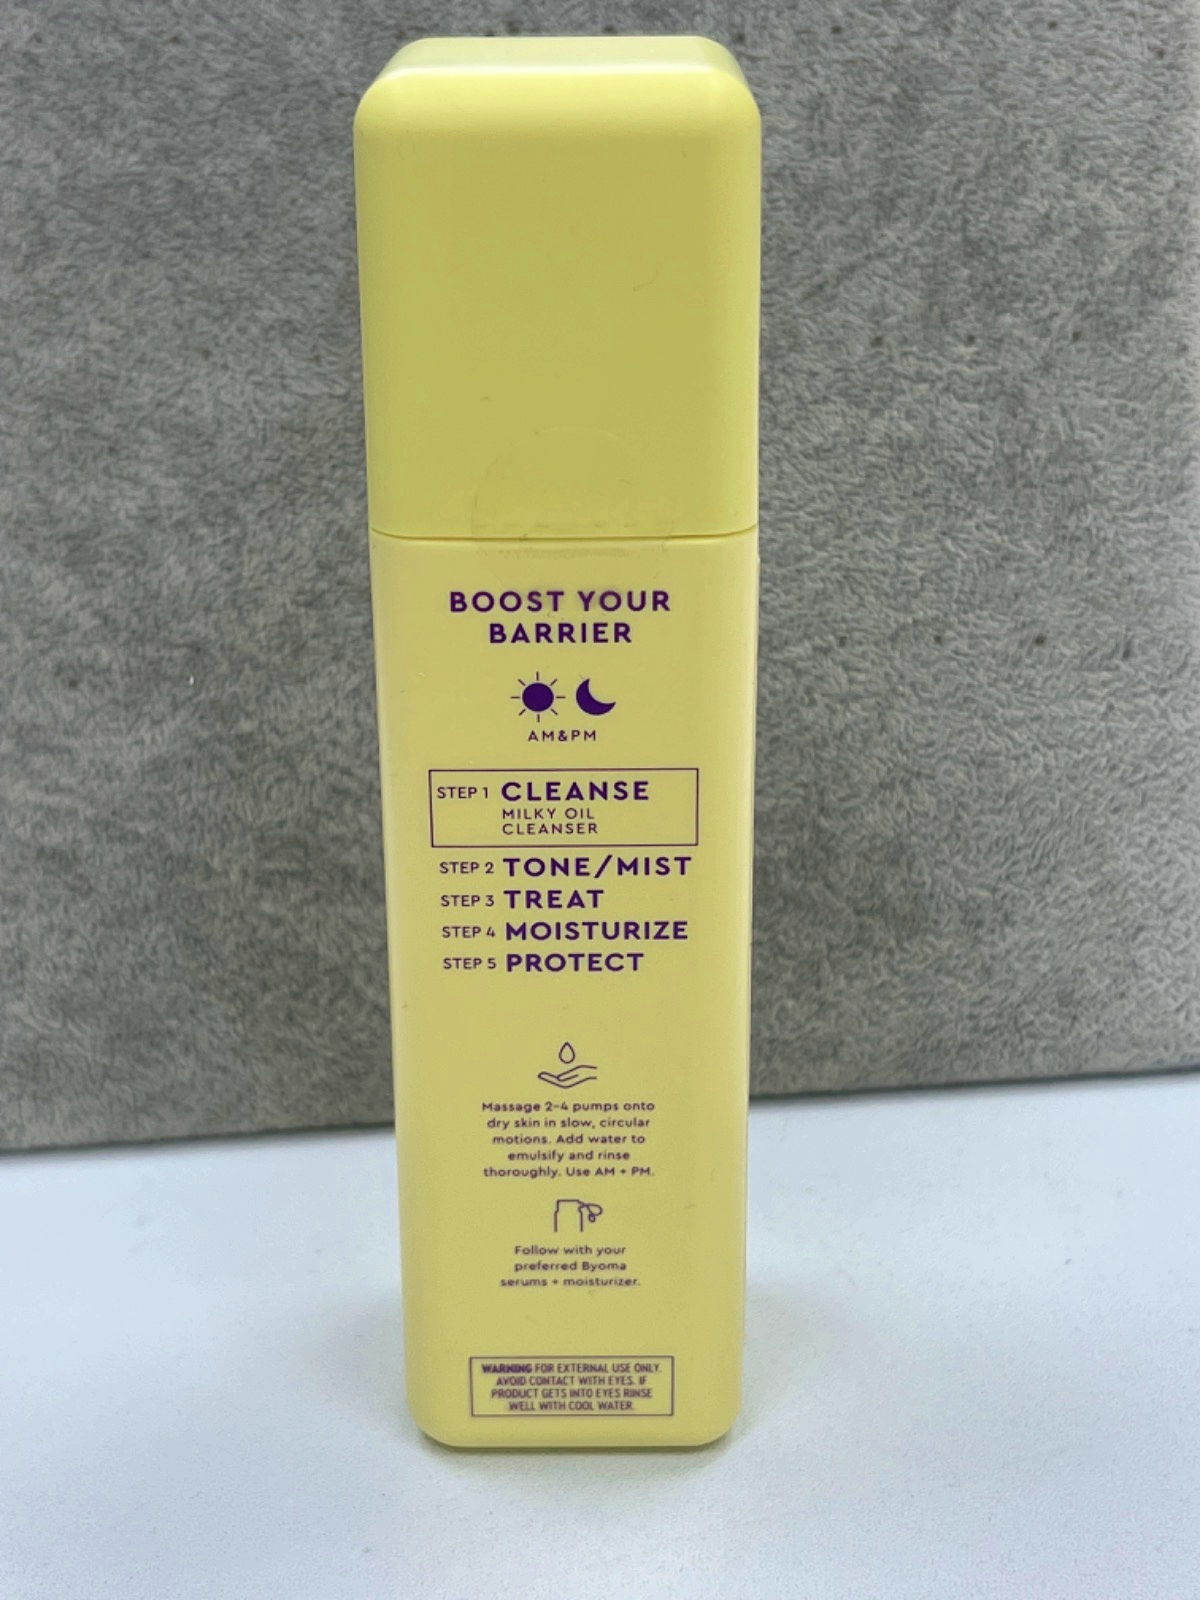 Byoma Milky Oil Cleanser No Shade 100ml